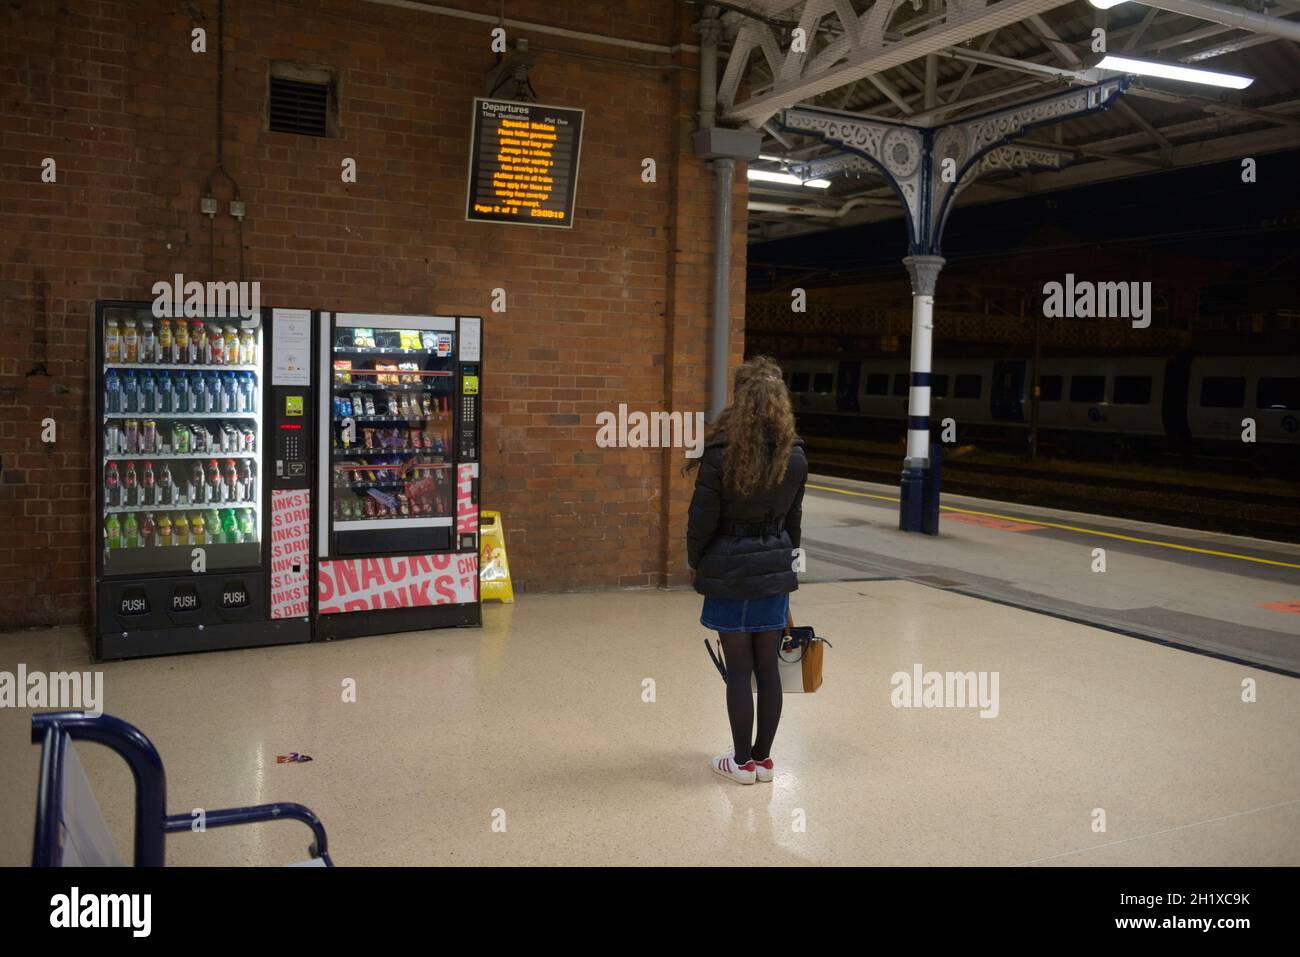 Doncaster, United Kingdom, 22nd May, 2021: Singular young woman wearing a coat, skirt and hand bag, waits during night time at doncaster train station Stock Photo